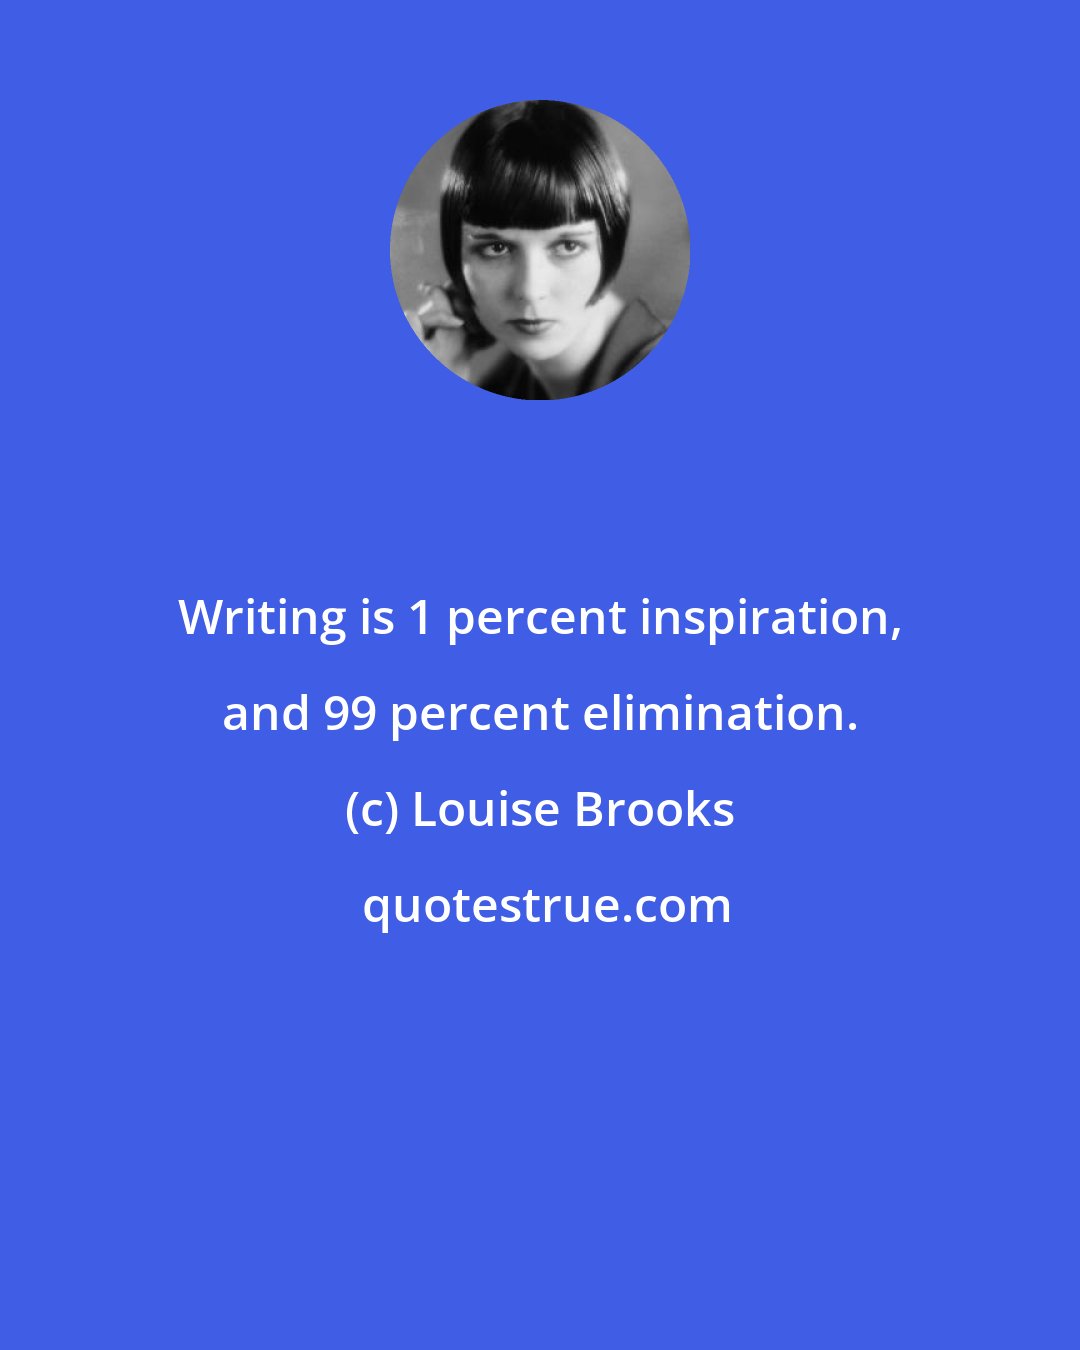 Louise Brooks: Writing is 1 percent inspiration, and 99 percent elimination.